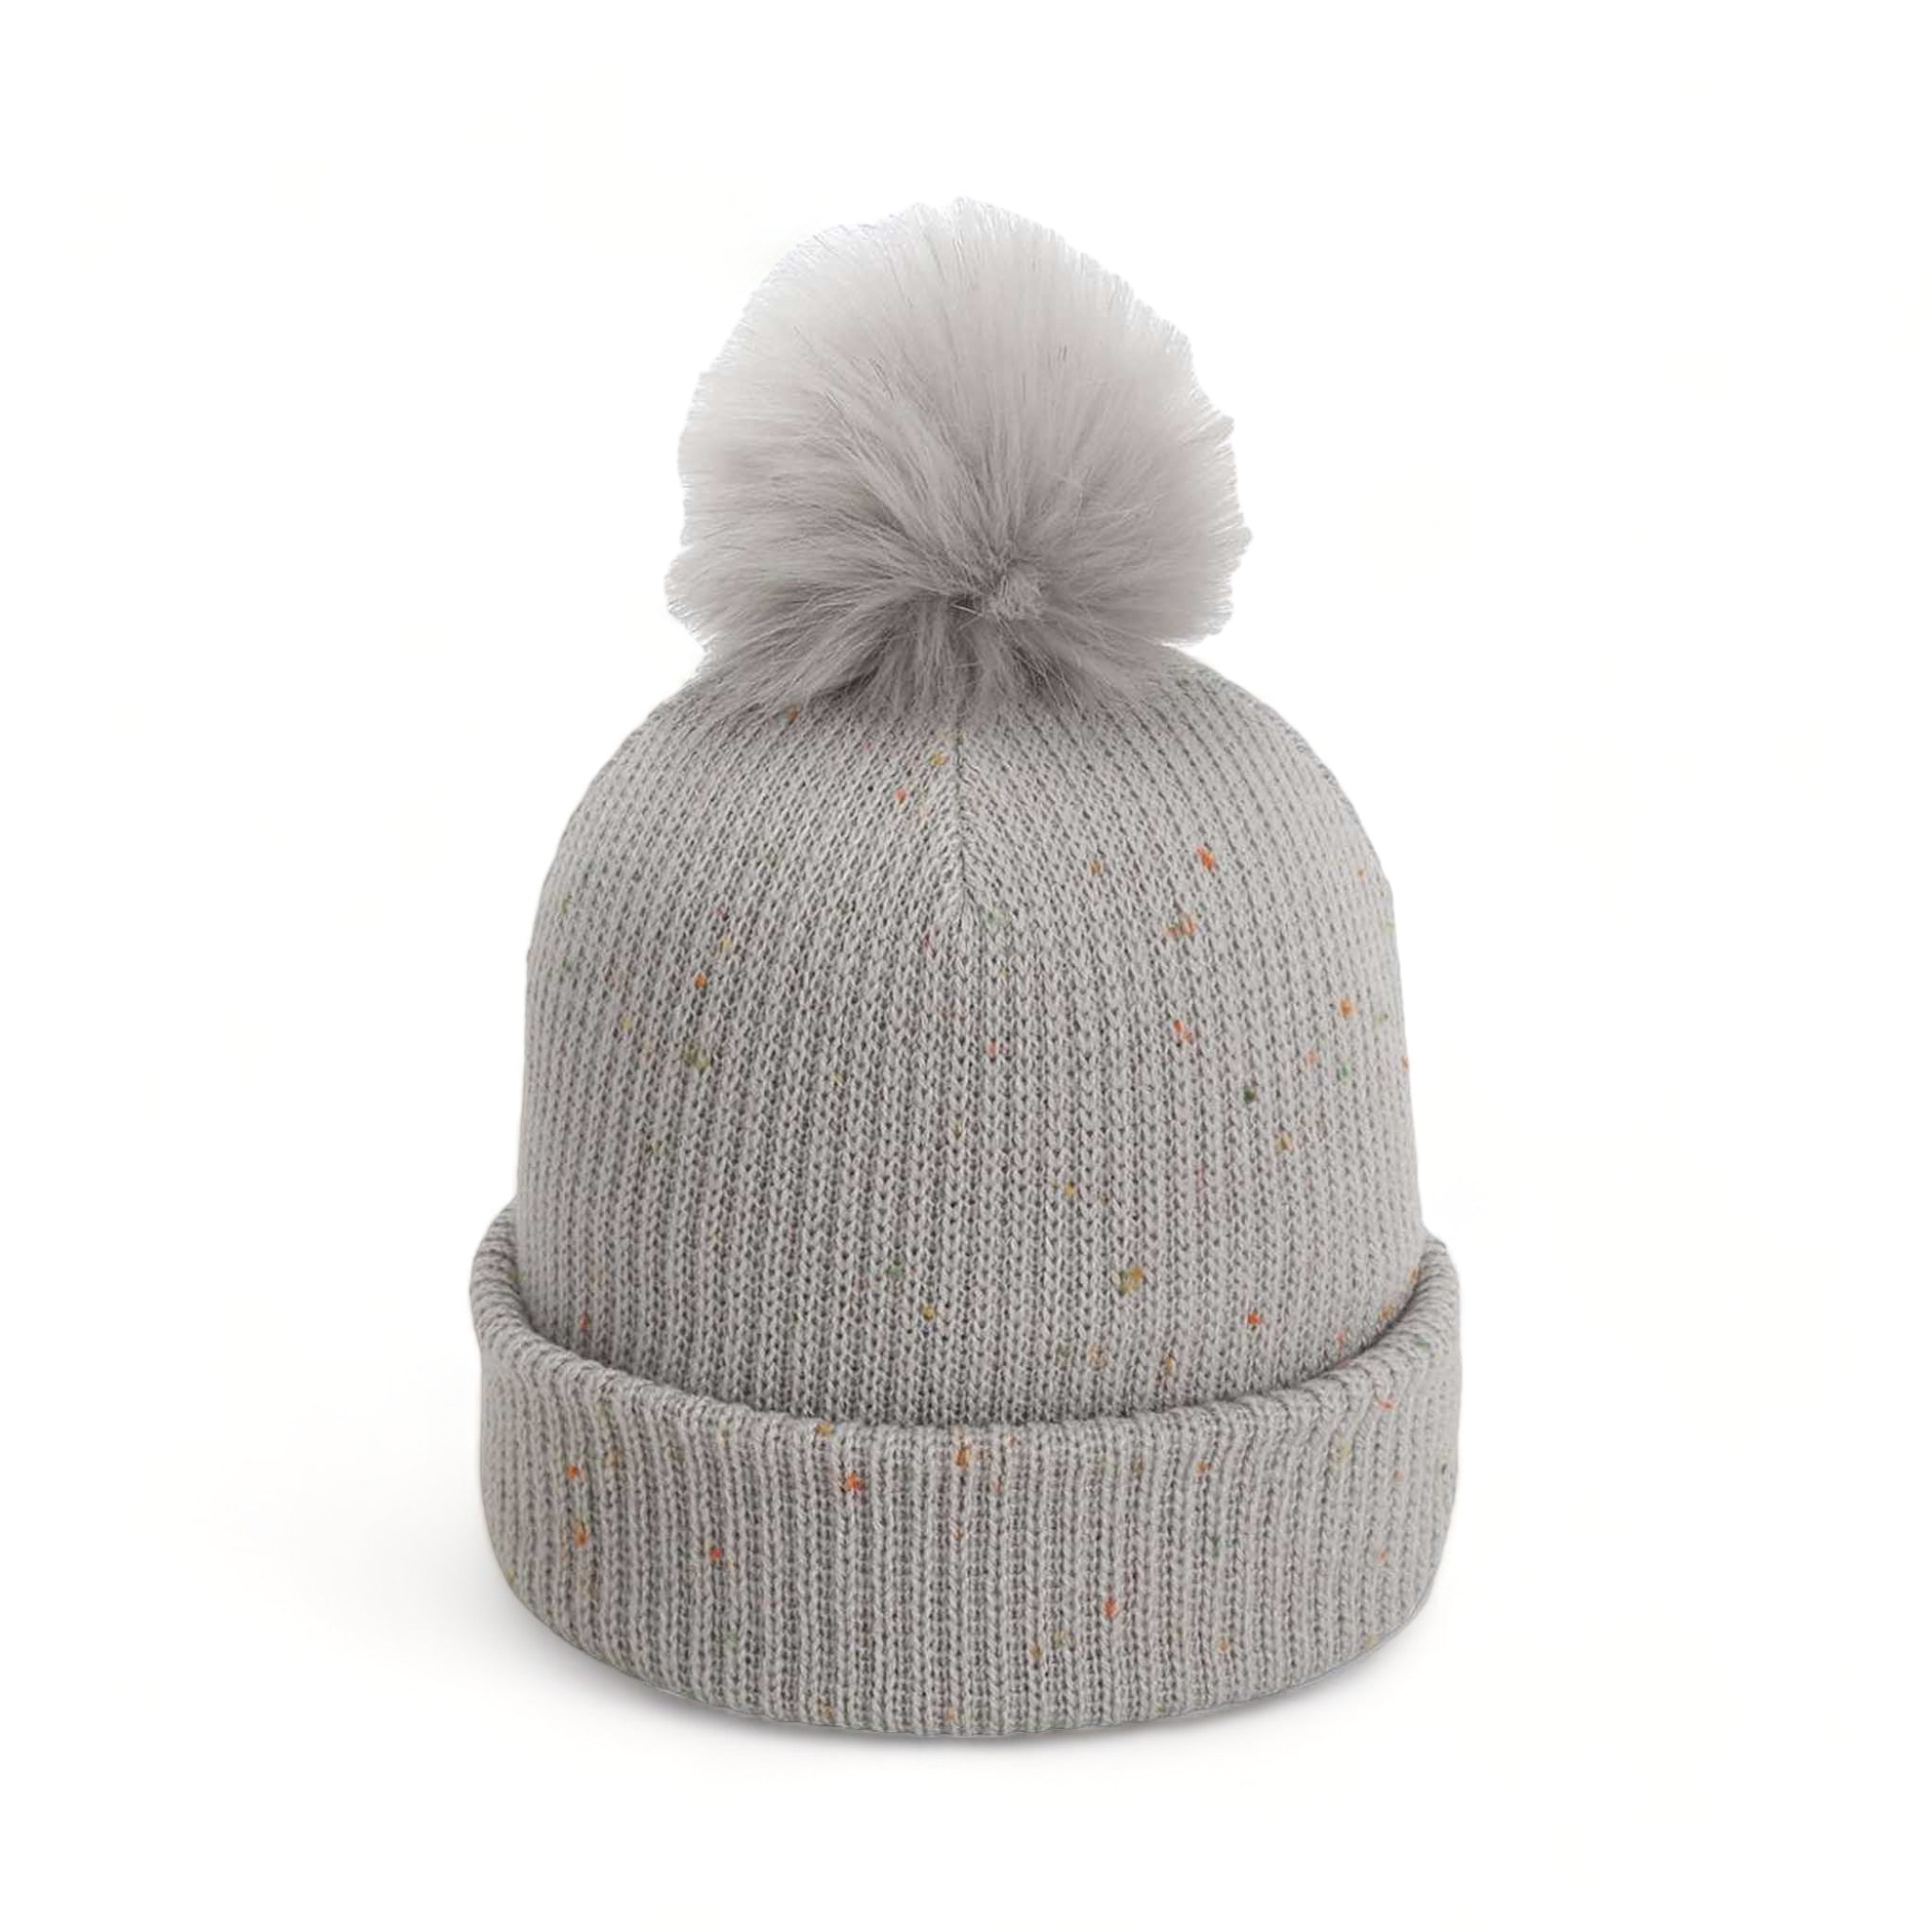 Front view of Imperial 6014 custom hat in light grey